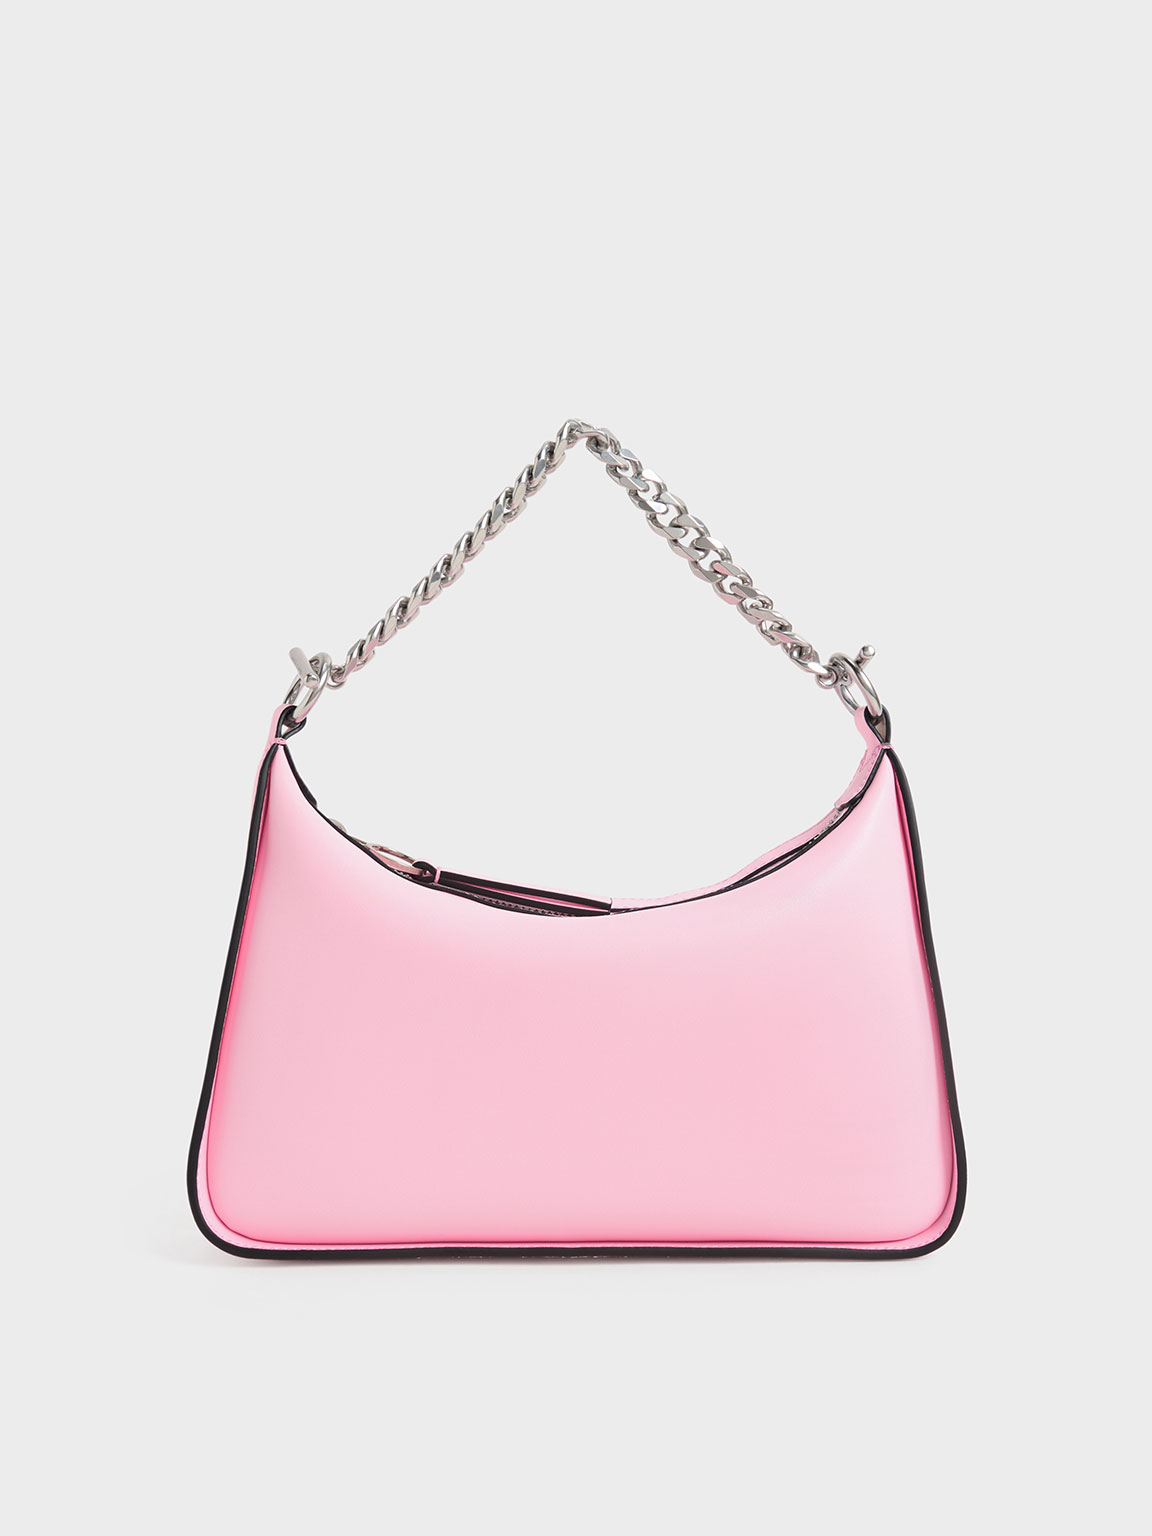 High Quality Cowhide Leather Pink Top Handle Bag With Metal Hardware Buckle  And Zipper Closure For Womens Fashionable Hobo Purse From Vogue_stage,  $129.14 | DHgate.Com